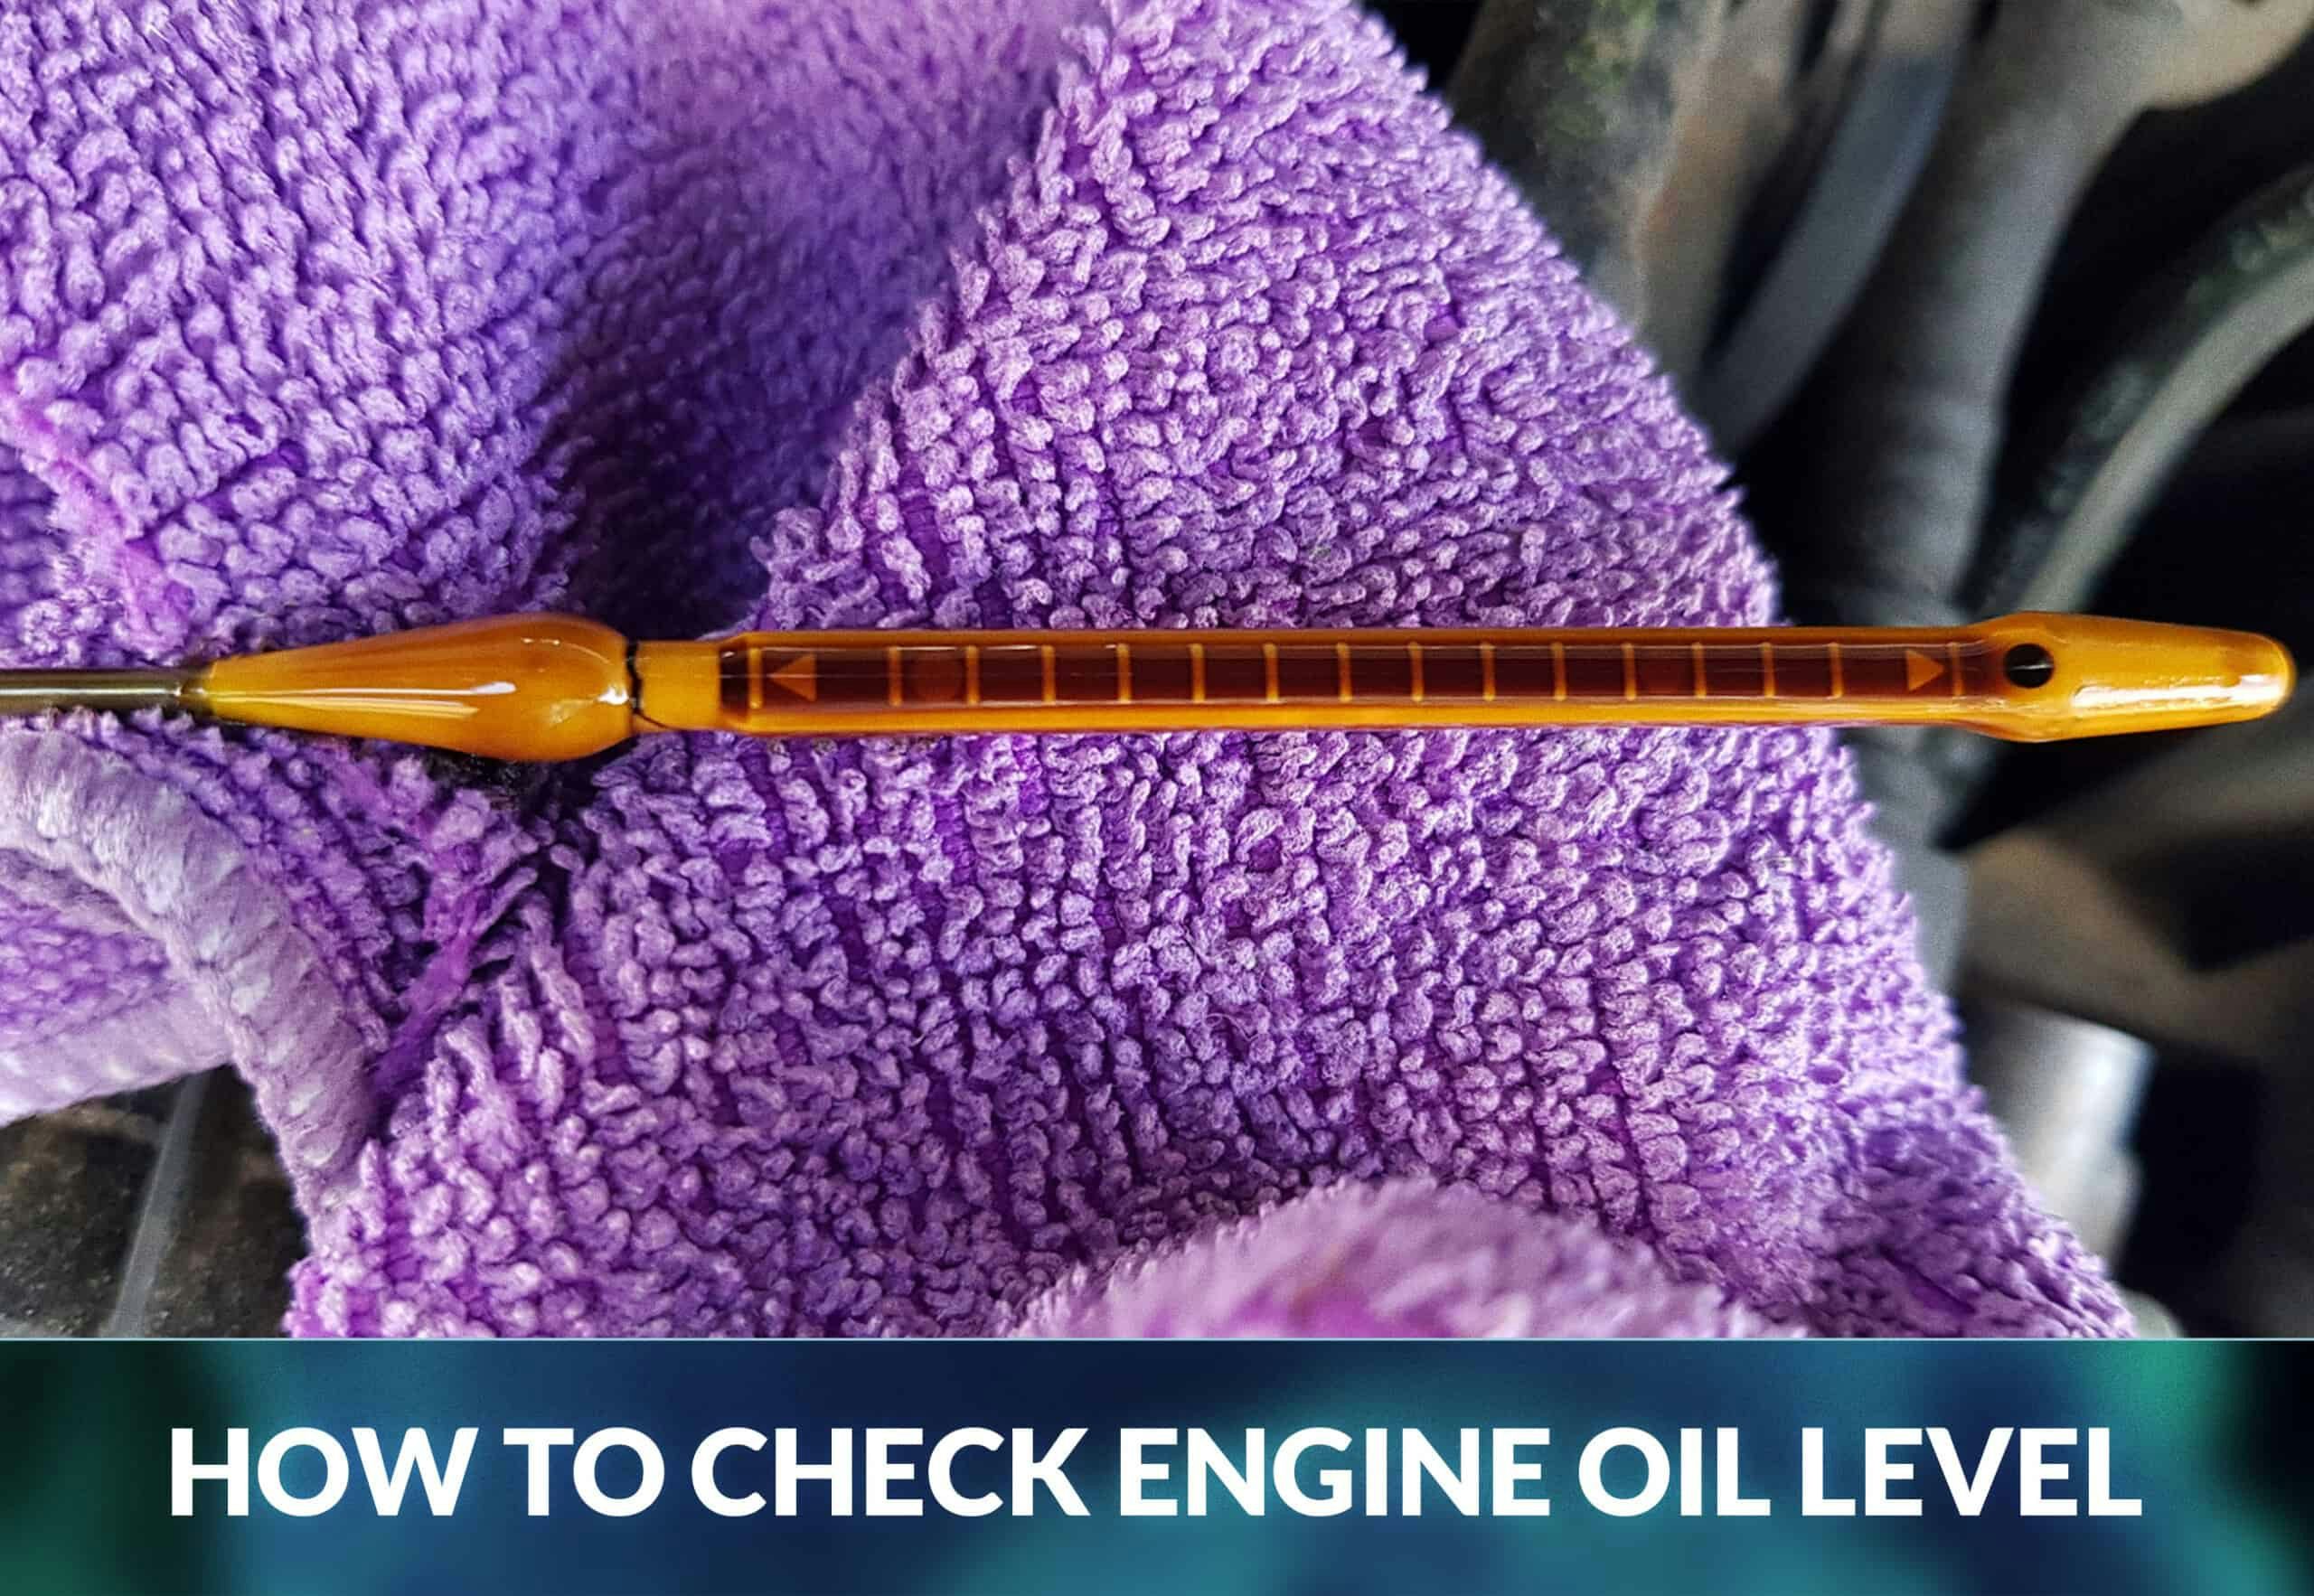 HOW TO CHECK ENGINE OIL LEVEL